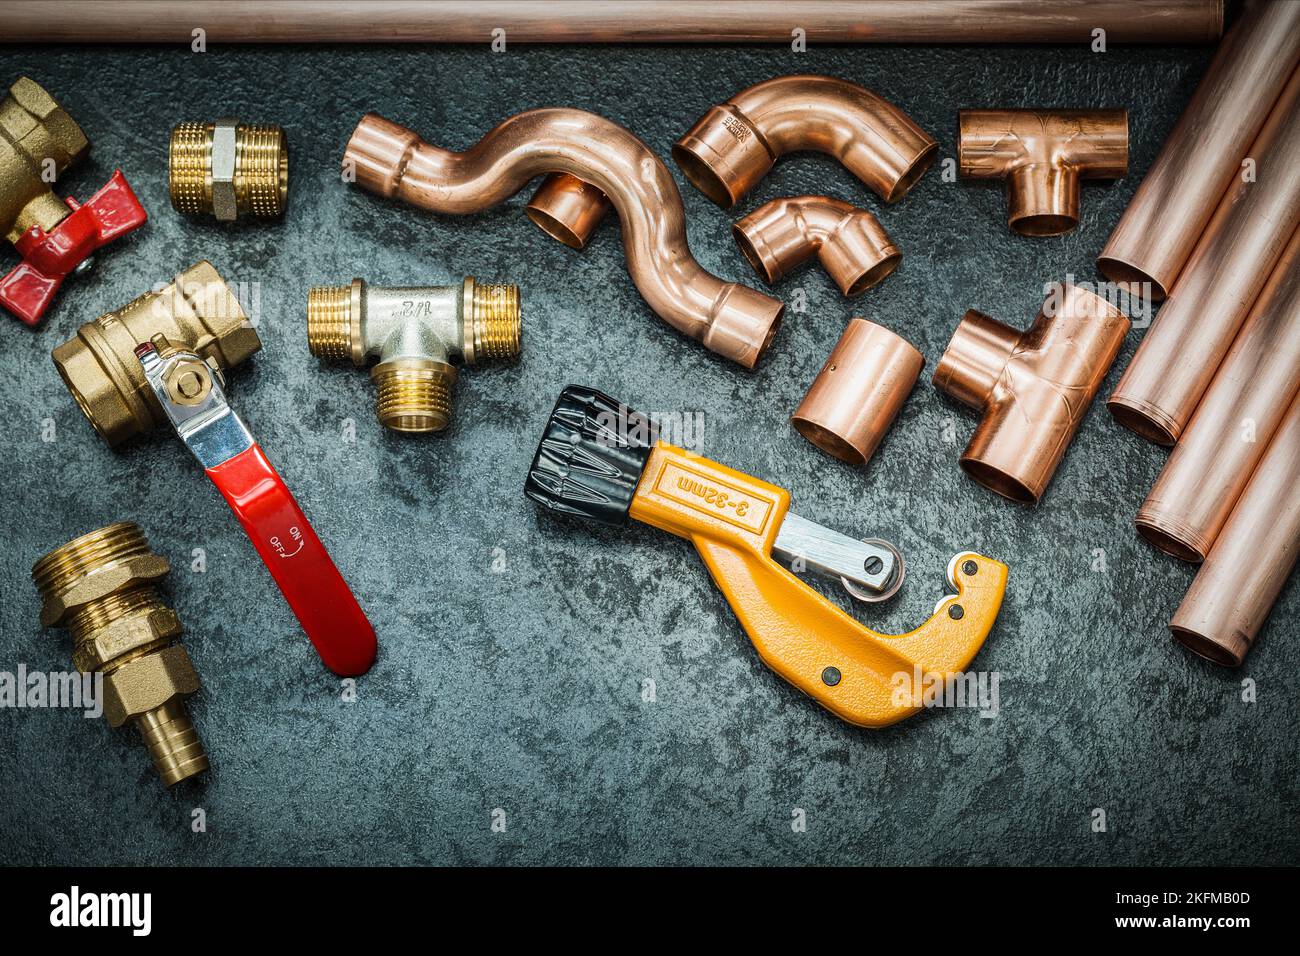 plumbers tools copper pipes fittings pipe cutter and valwes on black background Stock Photo